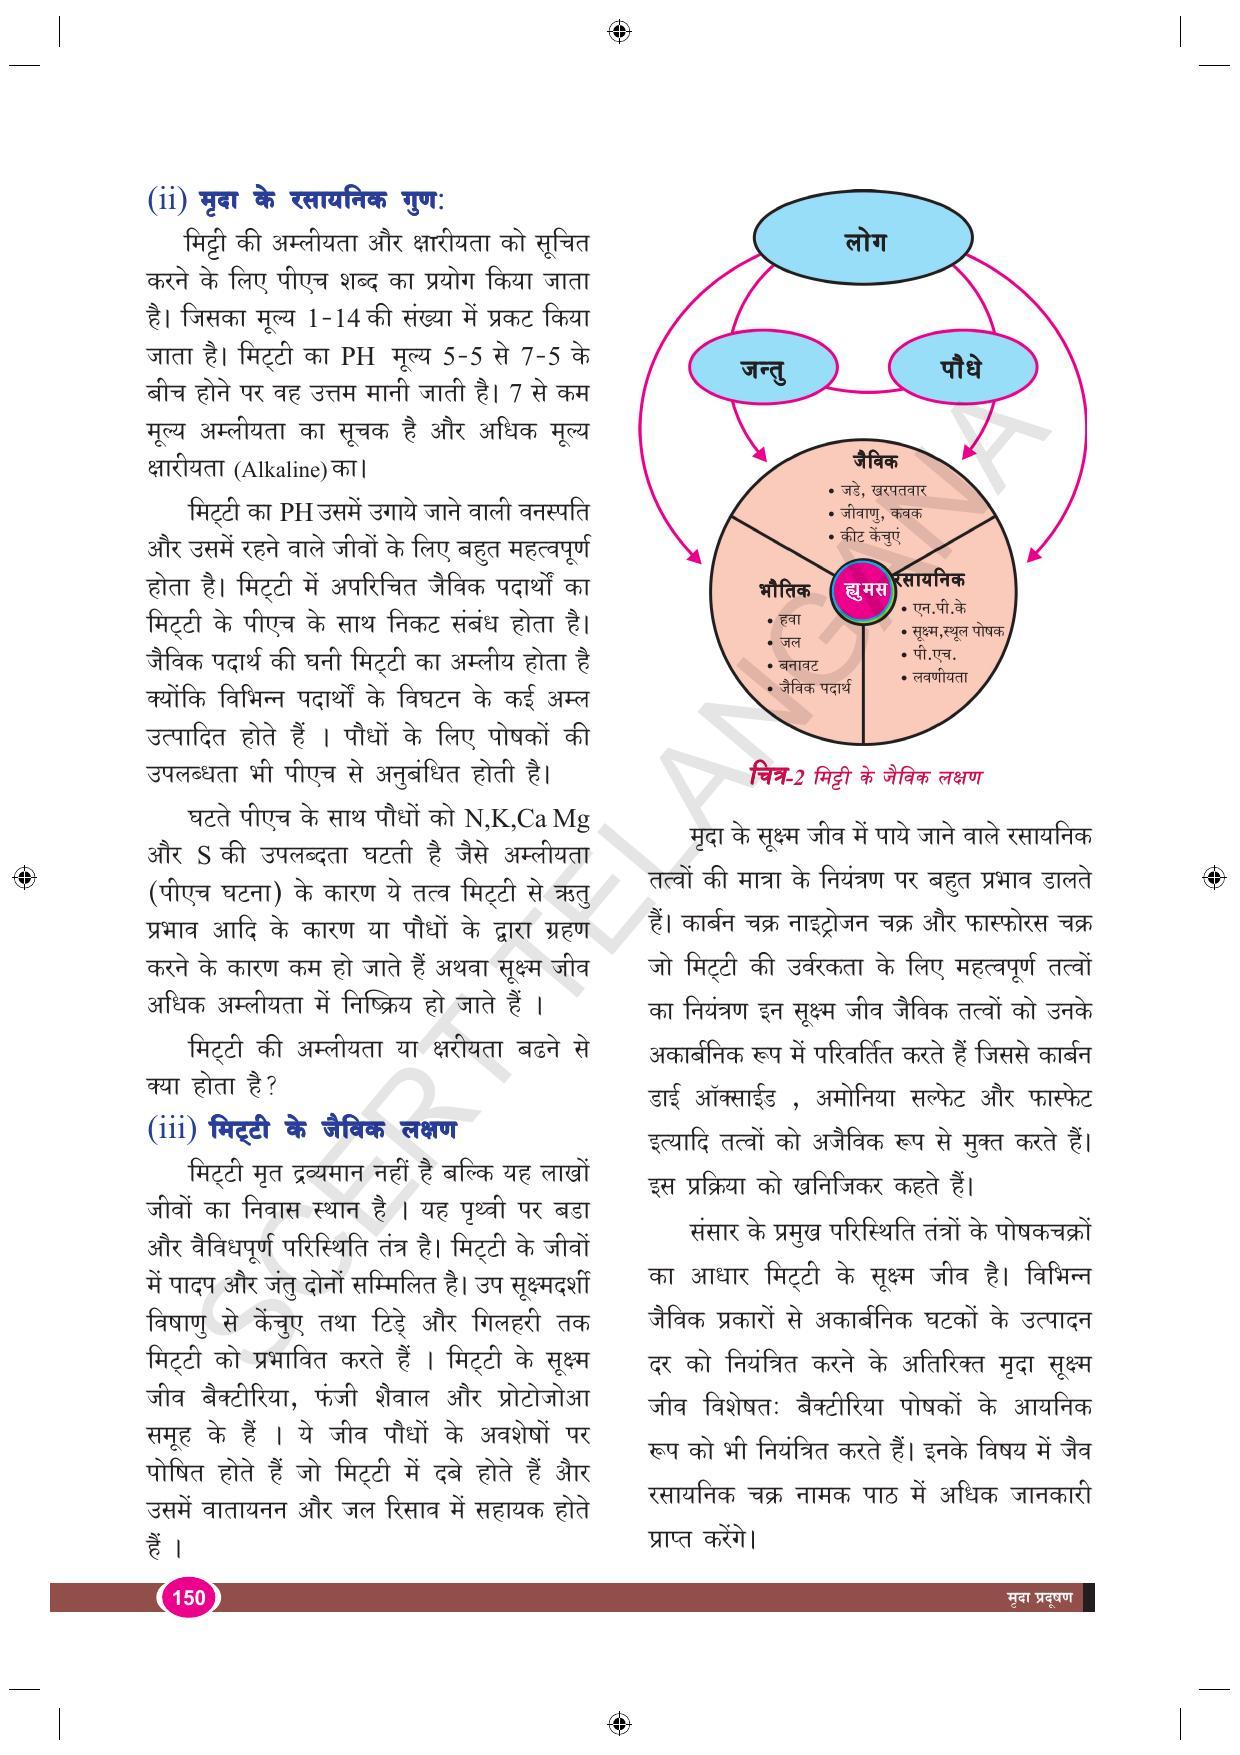 TS SCERT Class 9 Biological Science (Hindi Medium) Text Book - Page 162